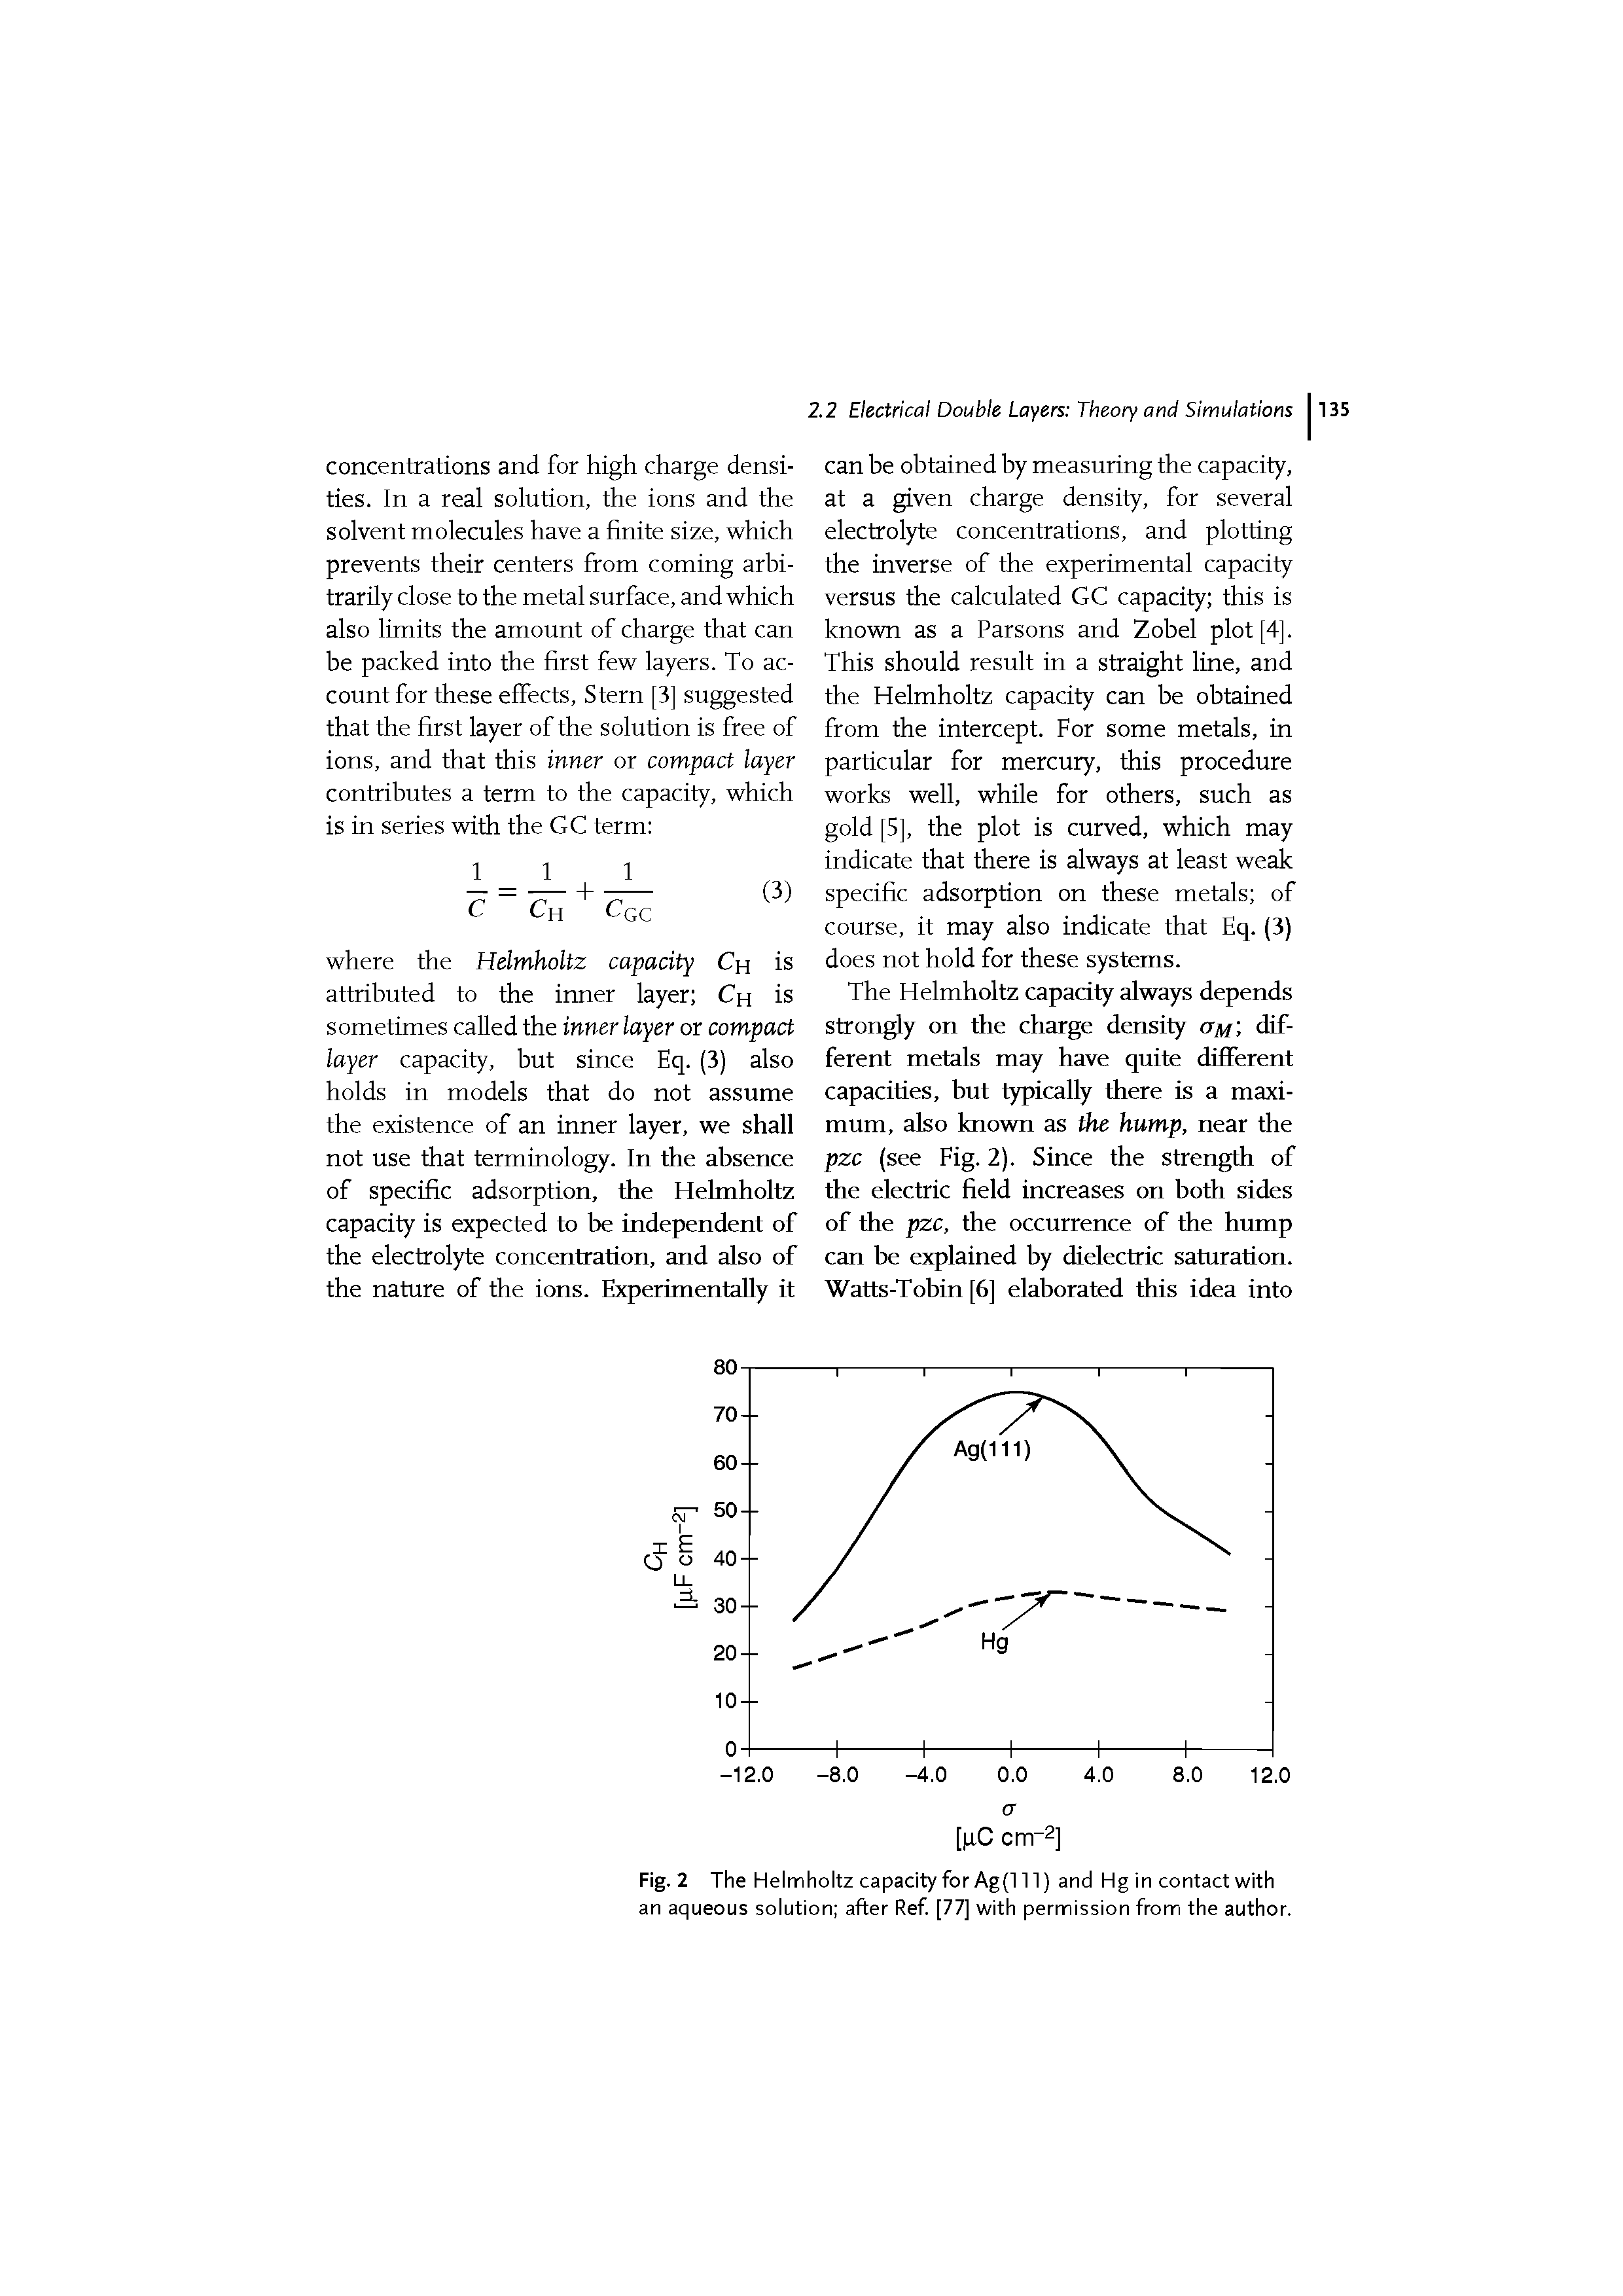 Fig. 2 The Helmholtz capacity for Ag(ni) and Hg in contact with an aqueous solution after Ref. [77] with permission from the author.